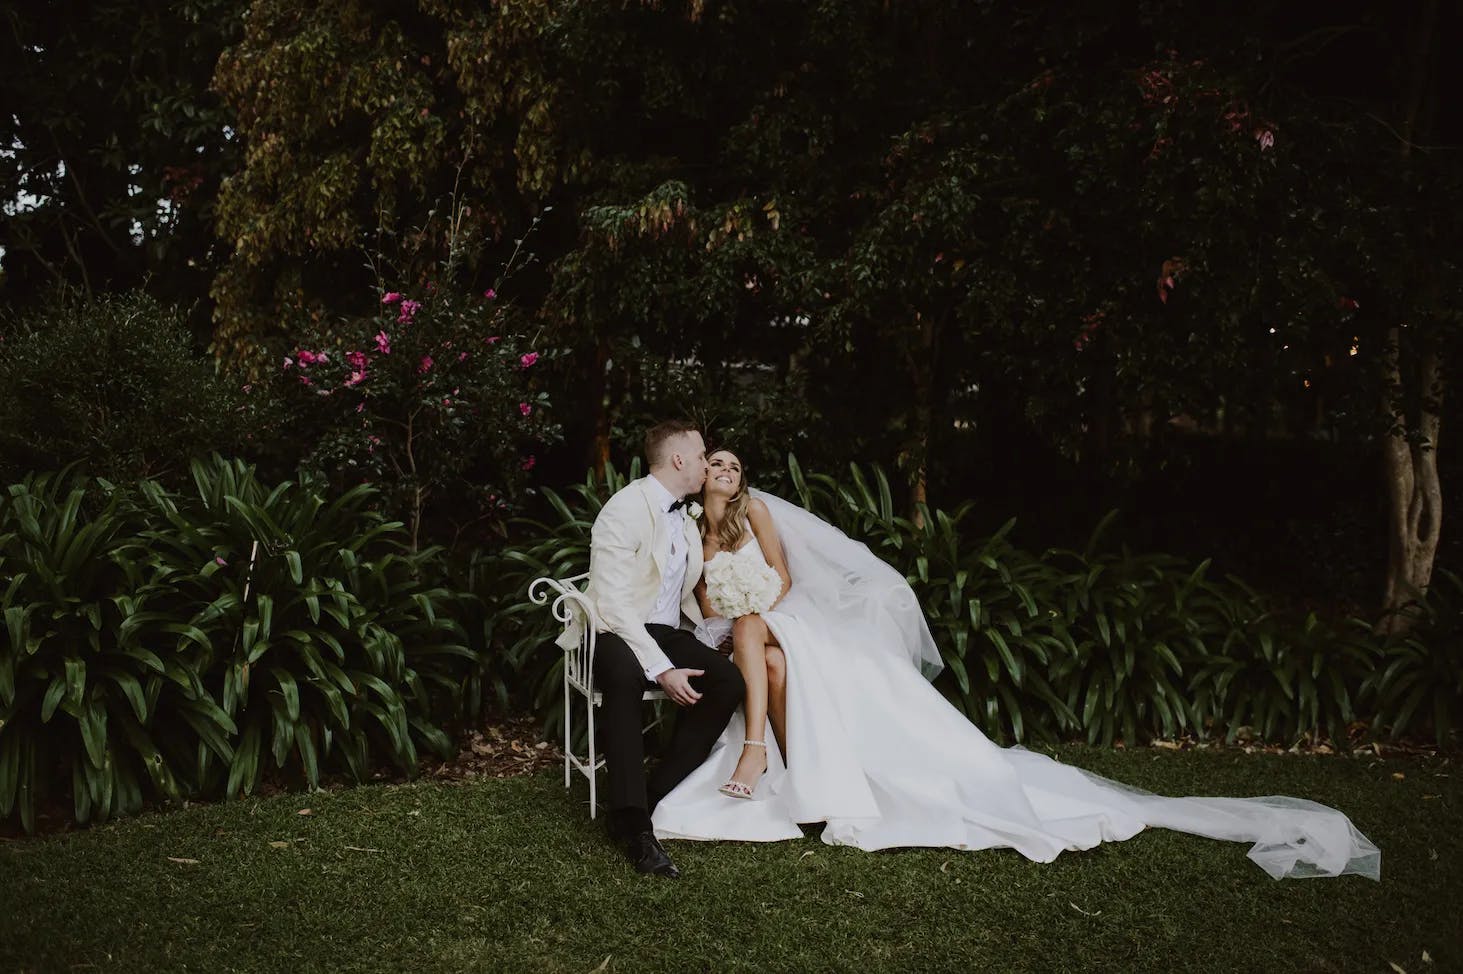 A bride and groom sit on a white bench in a lush, green garden. The groom, in a white jacket and black pants, kisses the bride, who is in a long white gown with a veil. They are surrounded by plants and flowers, enjoying a serene and intimate moment.